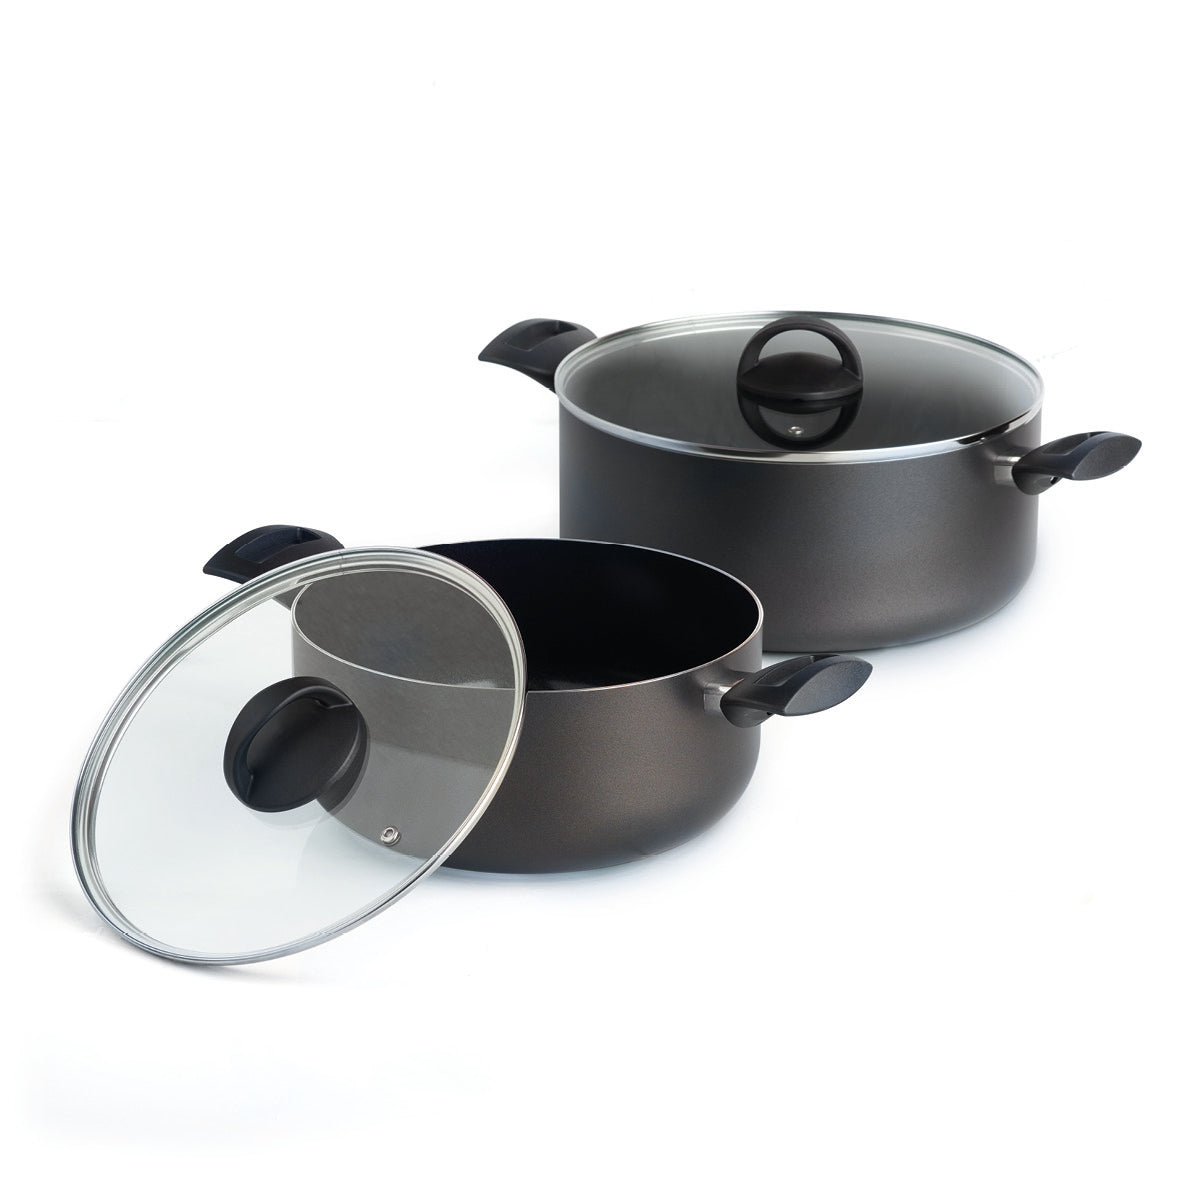 Set of 2 pots with lid Carbone Pro - ultra resistant and non-stick - aluminum - Black